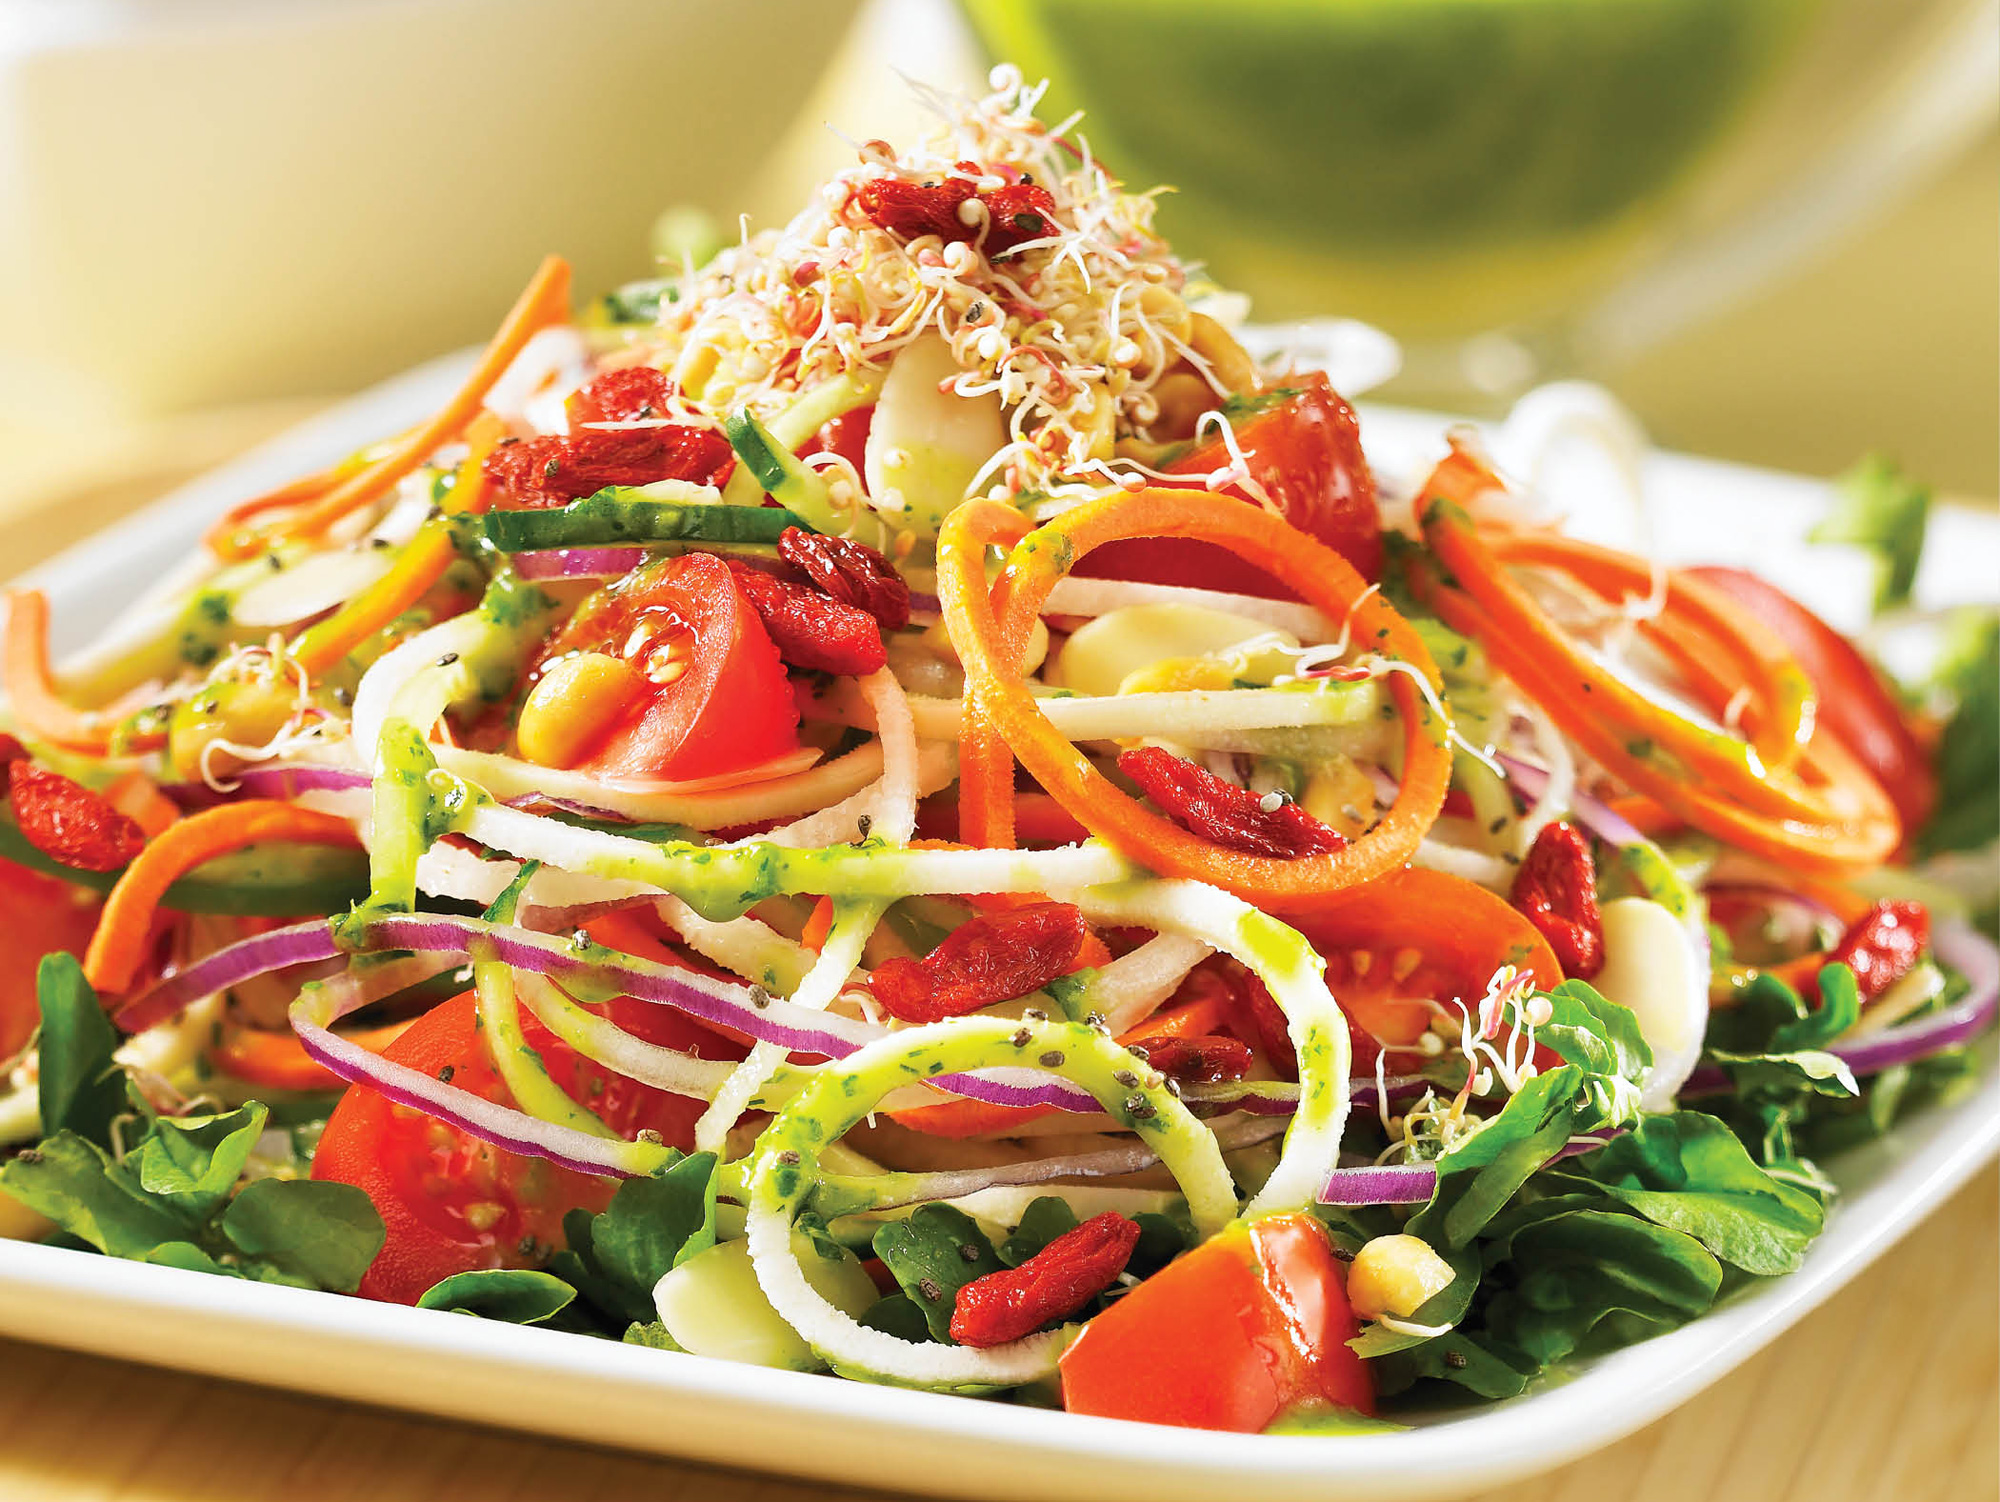 Enjoy the kaleidoscope of colors in this healthy paleo vegetarian salad.